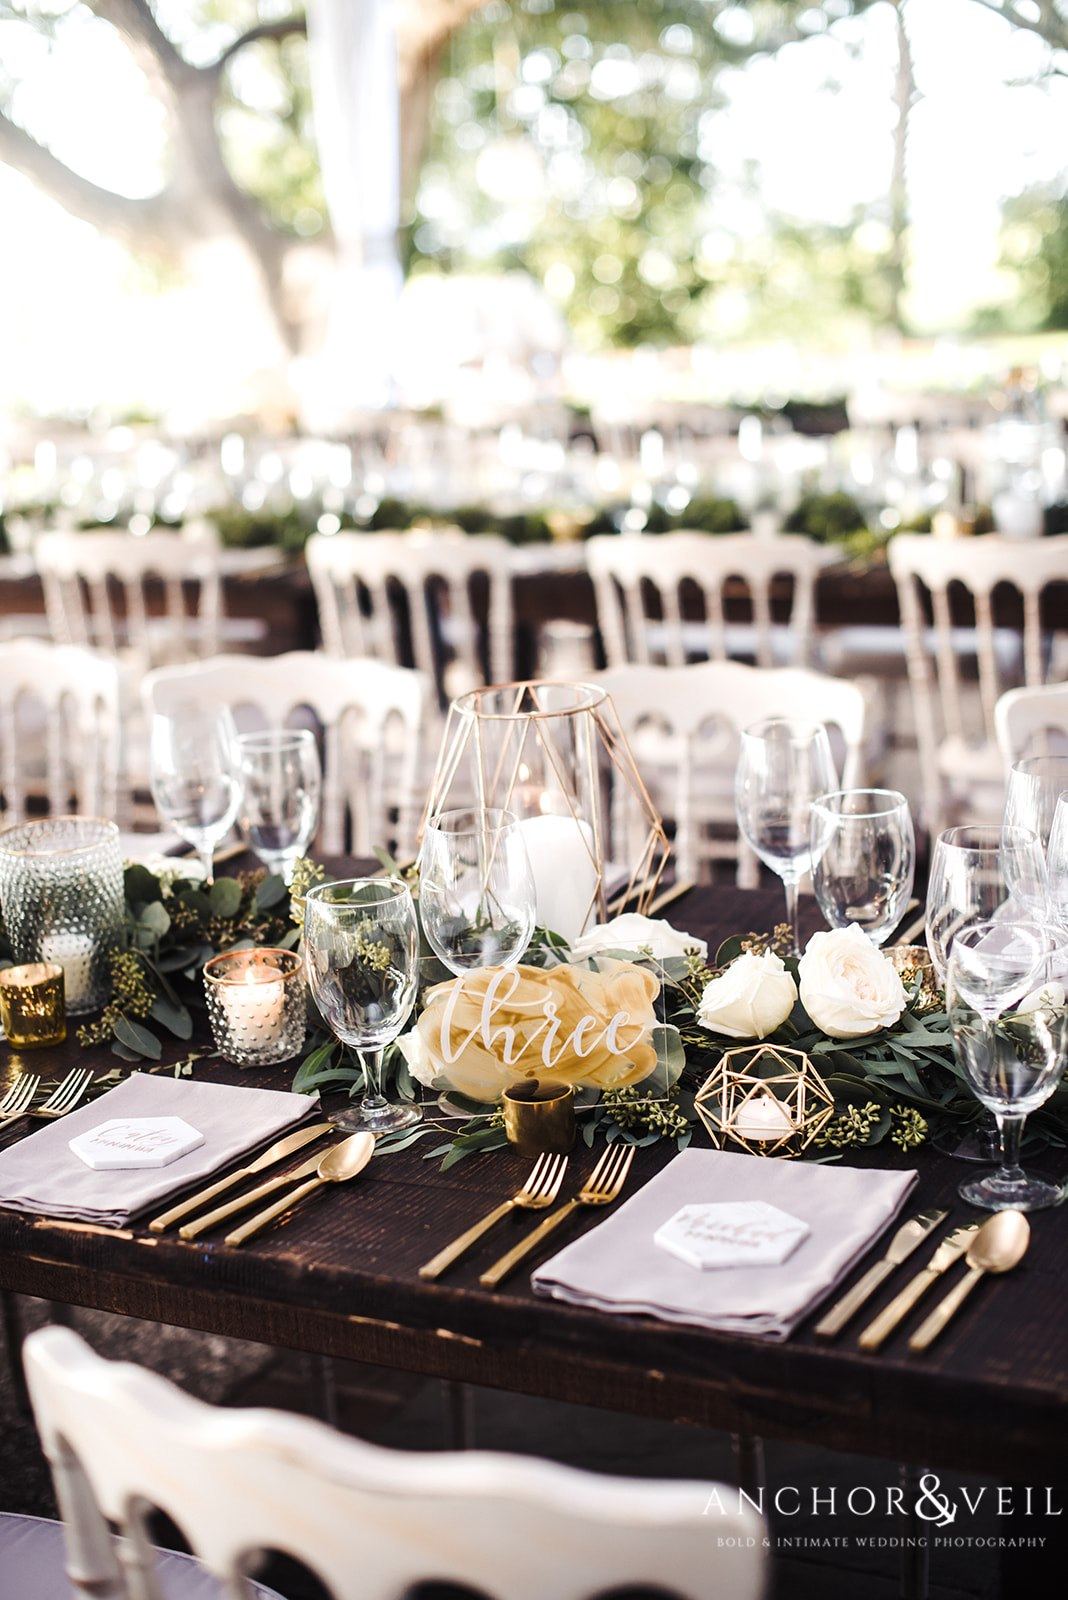 The table setting at the Lowndes Grove Plantation Wedding